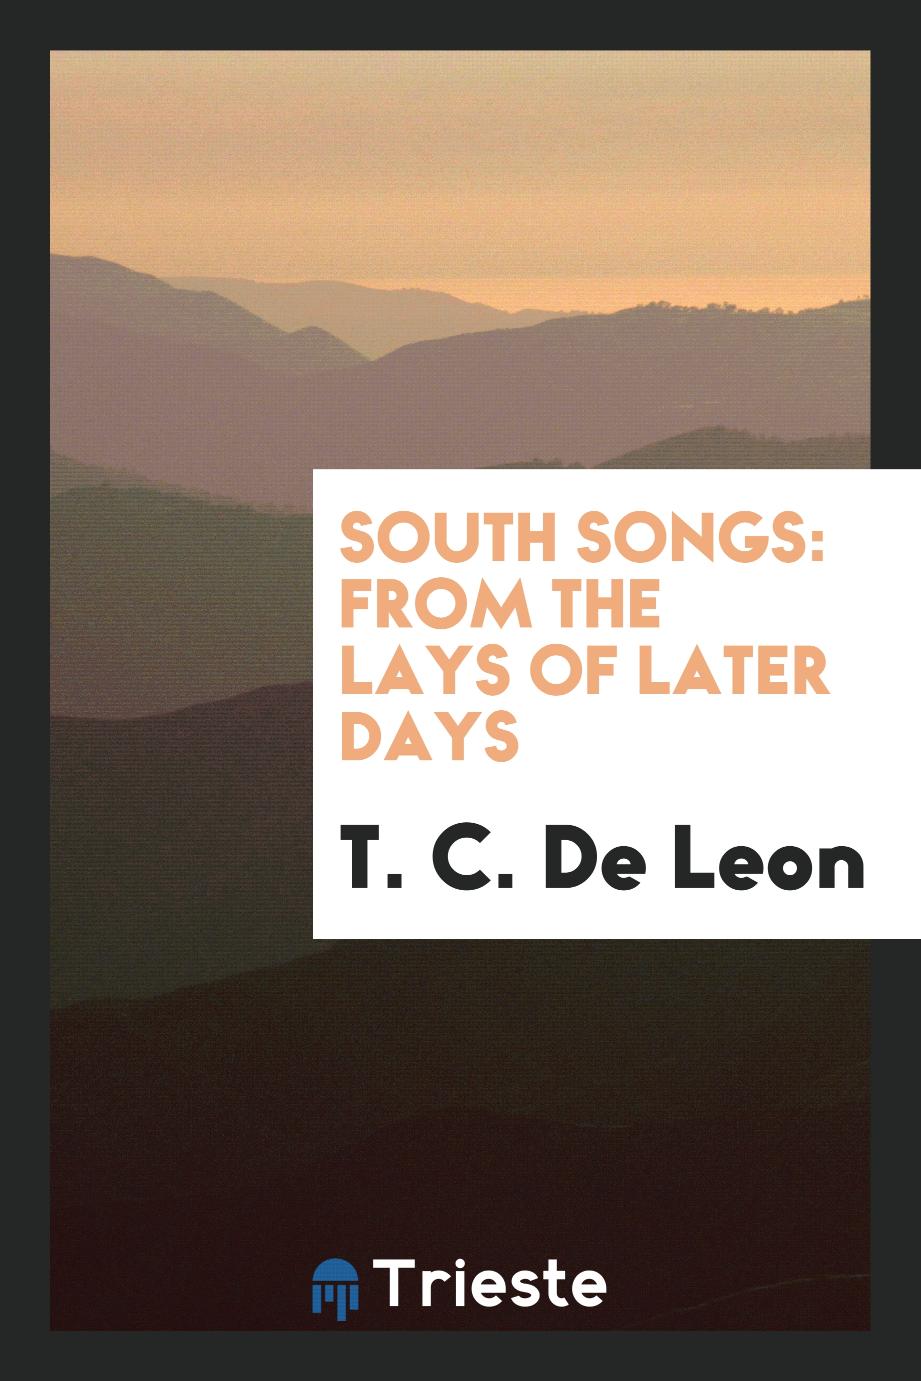 South Songs: From the Lays of Later Days